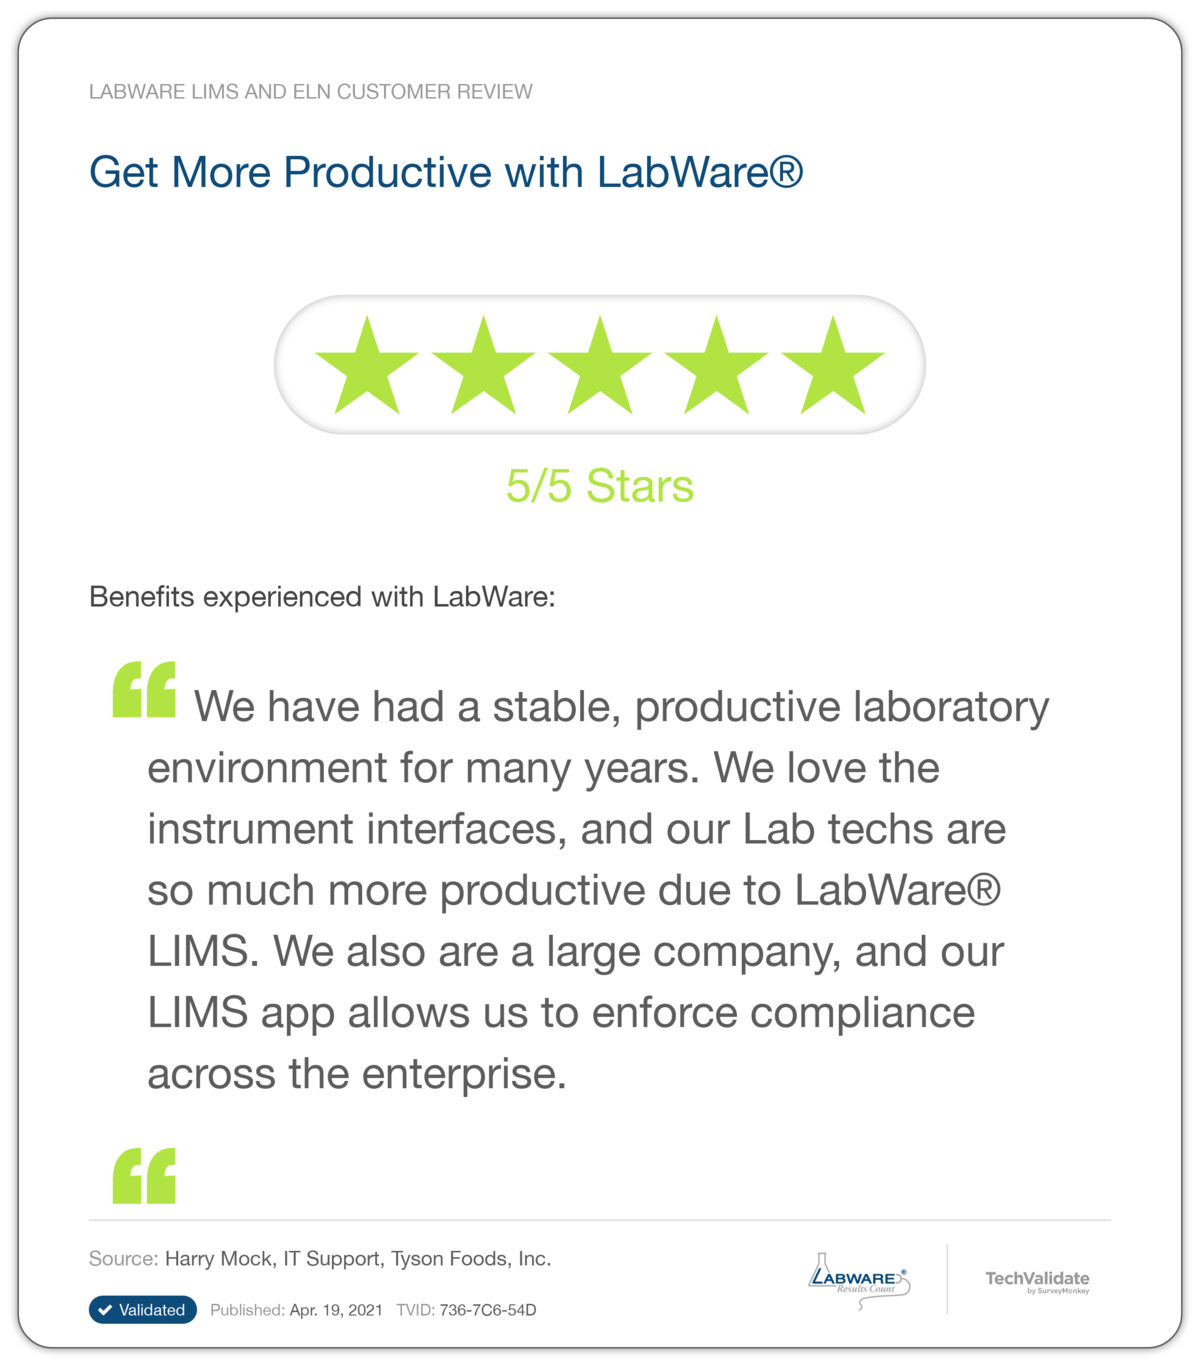 Get More Productive with LabWare®